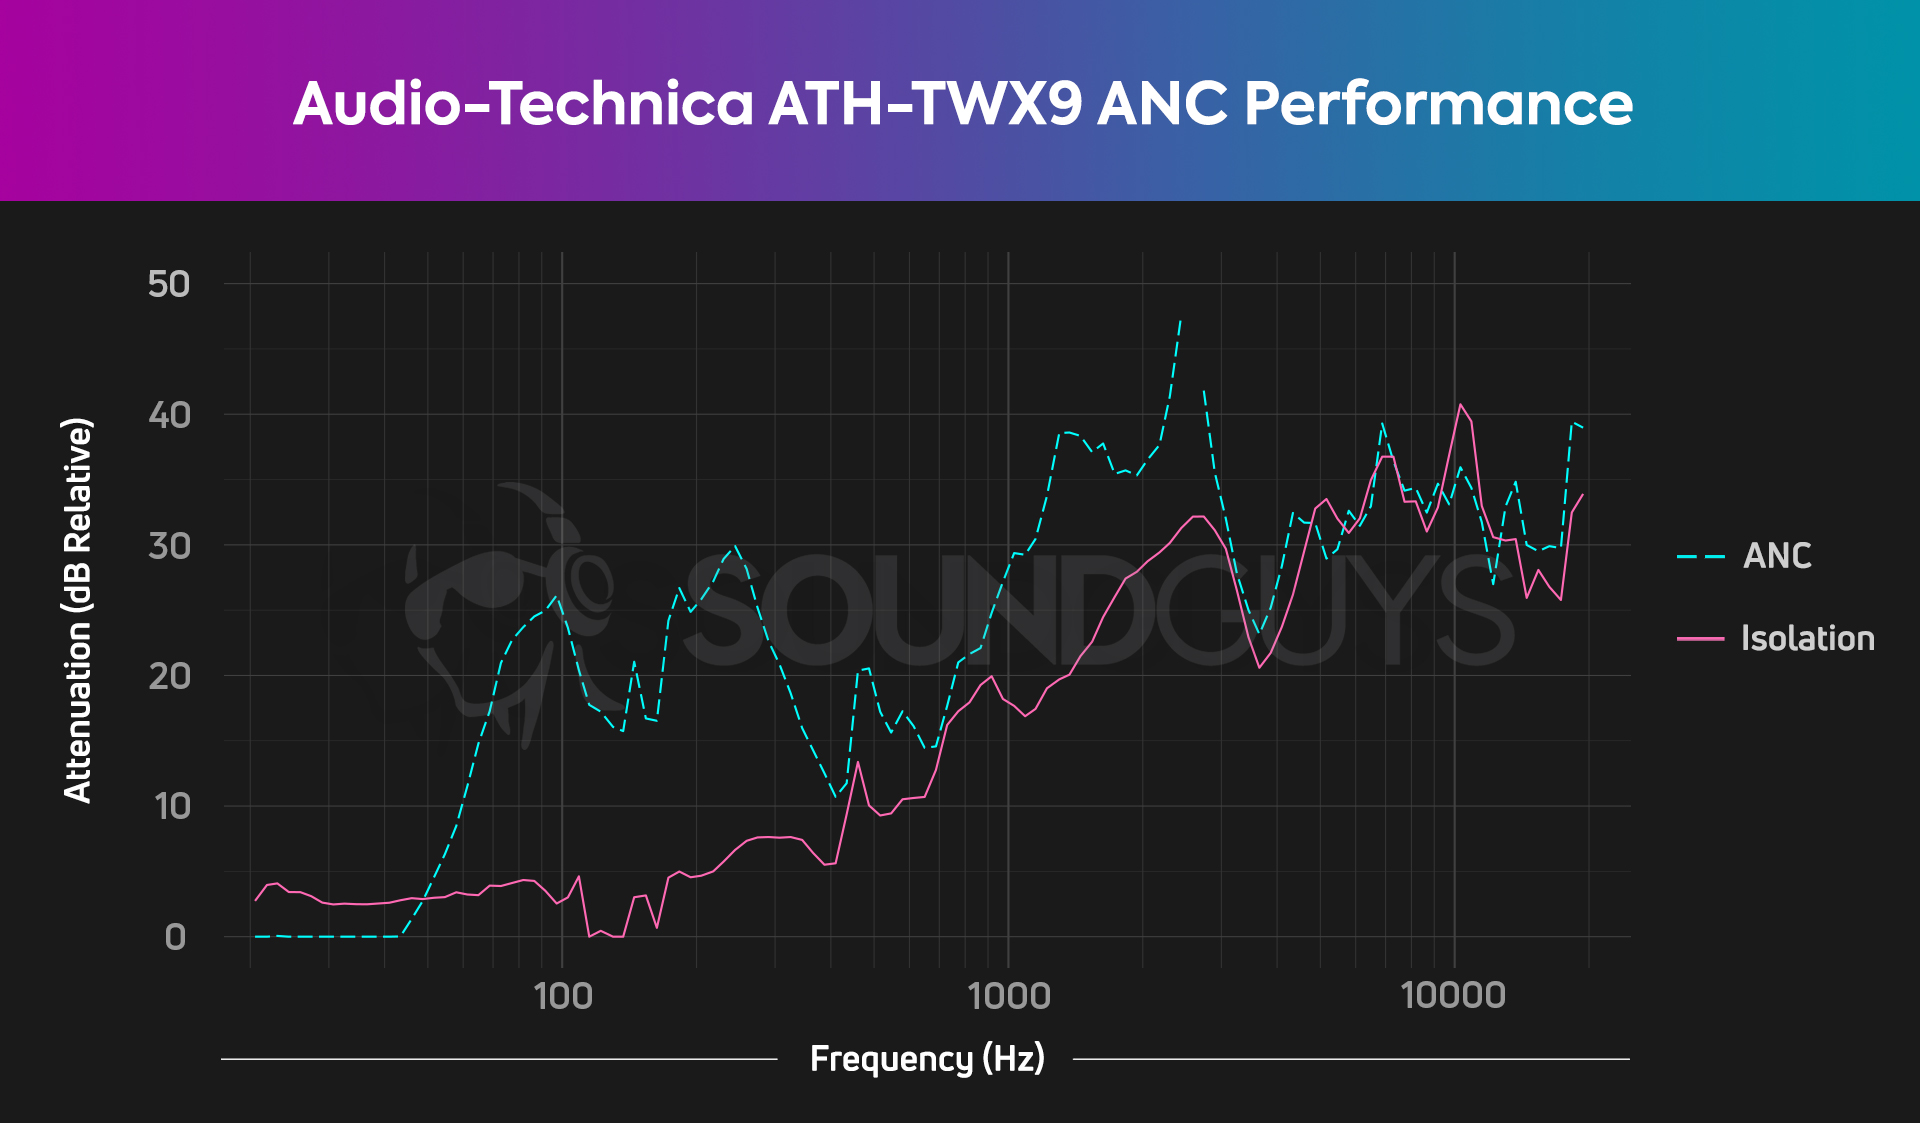 A noise canceling chart for the Audio-Technica ATH-TWX9, which shows very good low end attenuation.